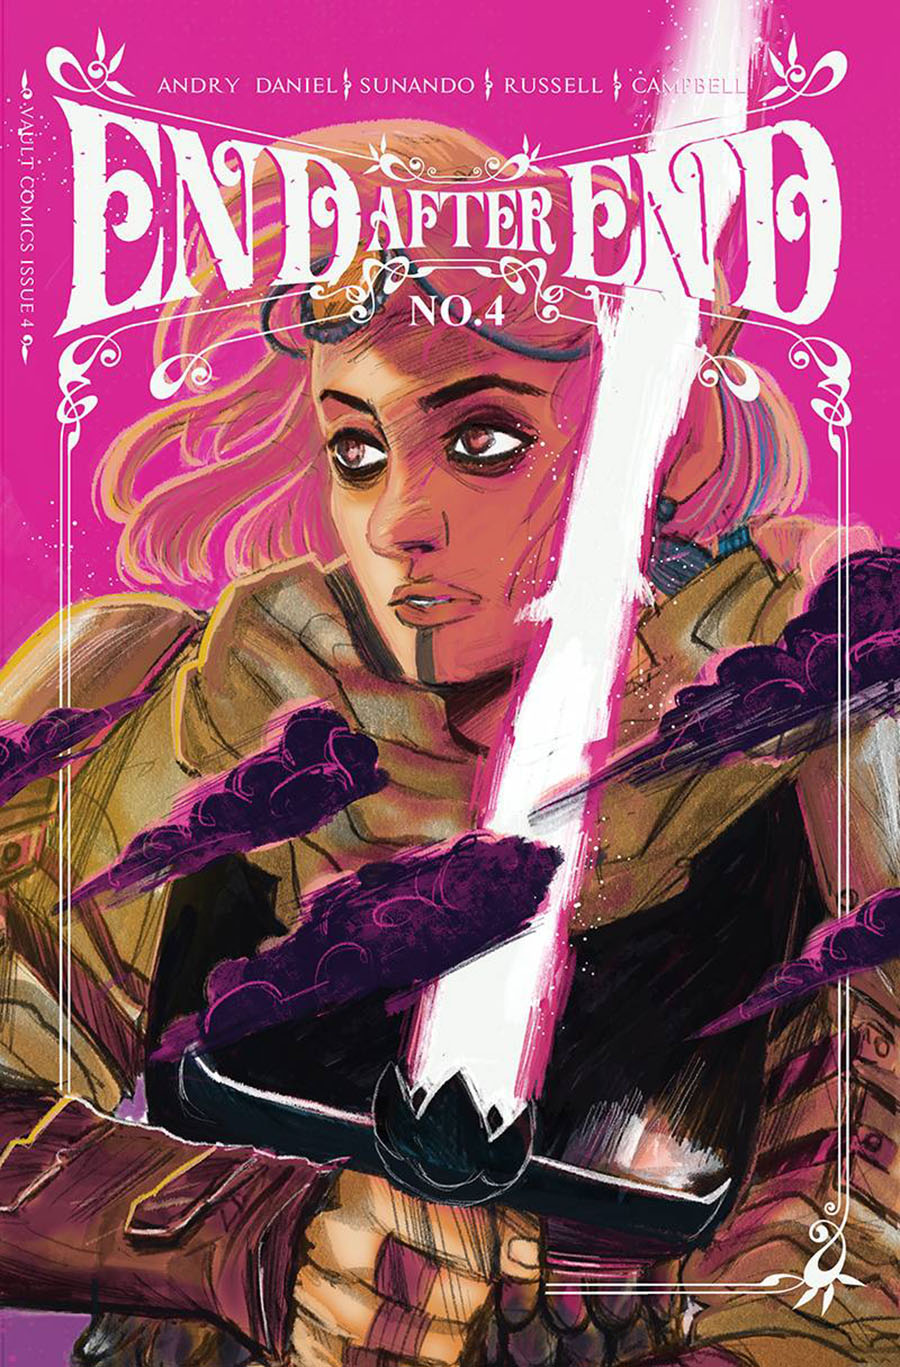 End After End #4 Cover A Regular Sunando C Cover